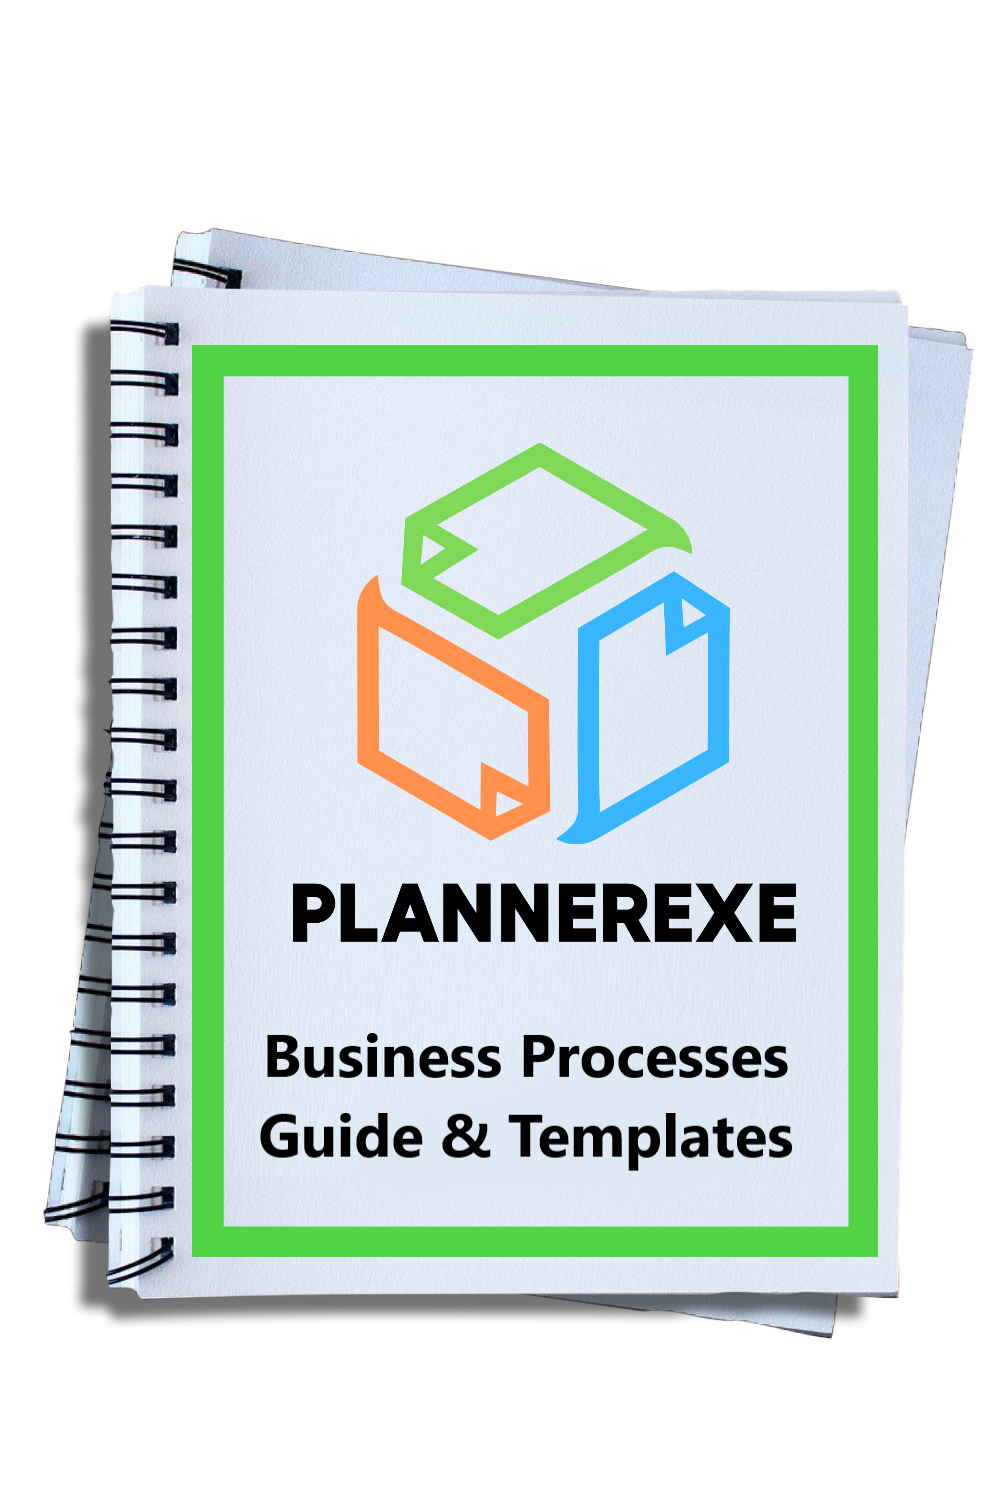 Business Processes Guide and Templates